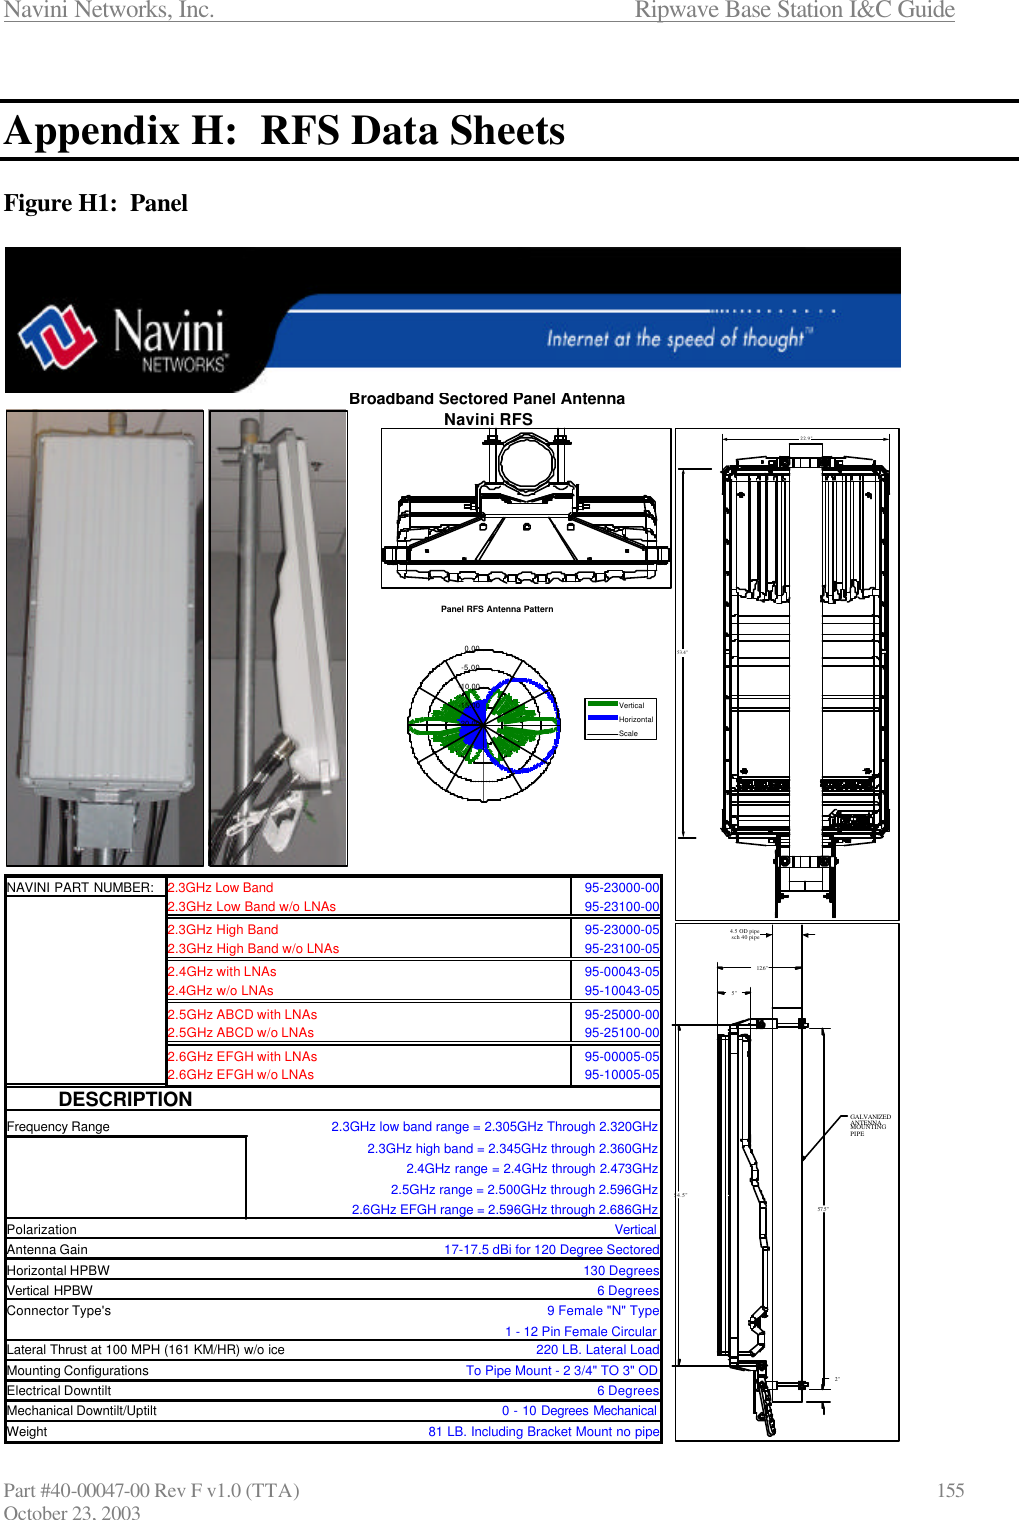 Navini Networks, Inc.                      Ripwave Base Station I&amp;C Guide Part #40-00047-00 Rev F v1.0 (TTA)                            155 October 23, 2003  Appendix H:  RFS Data Sheets  Figure H1:  Panel  NAVINI PART NUMBER: 95-23000-0095-23100-0095-23000-0595-23100-0595-00043-0595-10043-0595-25000-0095-25100-0095-00005-0595-10005-05DESCRIPTIONFrequency RangePolarizationAntenna GainHorizontal HPBWVertical HPBWConnector Type&apos;sLateral Thrust at 100 MPH (161 KM/HR) w/o iceMounting ConfigurationsElectrical DowntiltMechanical Downtilt/UptiltWeight2.4GHz w/o LNAs2.5GHz ABCD with LNAs2.5GHz ABCD w/o LNAs220 LB. Lateral LoadTo Pipe Mount - 2 3/4&quot; TO 3&quot; OD2.4GHz range = 2.4GHz through 2.473GHz2.5GHz range = 2.500GHz through 2.596GHz2.6GHz EFGH range = 2.596GHz through 2.686GHz9 Female &quot;N&quot; Type17-17.5 dBi for 120 Degree Sectored6 Degrees2.3GHz Low Band Vertical2.6GHz EFGH with LNAs2.6GHz EFGH w/o LNAs2.3GHz High Band2.3GHz Low Band w/o LNAs2.3GHz High Band w/o LNAs2.3GHz low band range = 2.305GHz Through 2.320GHz2.3GHz high band = 2.345GHz through 2.360GHz2.4GHz with LNAs81 LB. Including Bracket Mount no pipeBroadband Sectored Panel AntennaNavini RFS6 Degrees0 - 10 Degrees Mechanical1 - 12 Pin Female Circular130 DegreesPanel RFS Antenna Pattern-20.00-15.00-10.00-5.000.00VerticalHorizontalScale57.5&quot;2&quot;12.6&quot;54.5&quot;5&quot;GALVANIZEDANTENNAMOUNTINGPIPE4.5 OD pipesch 40 pipe53.4&quot;22.9&quot;